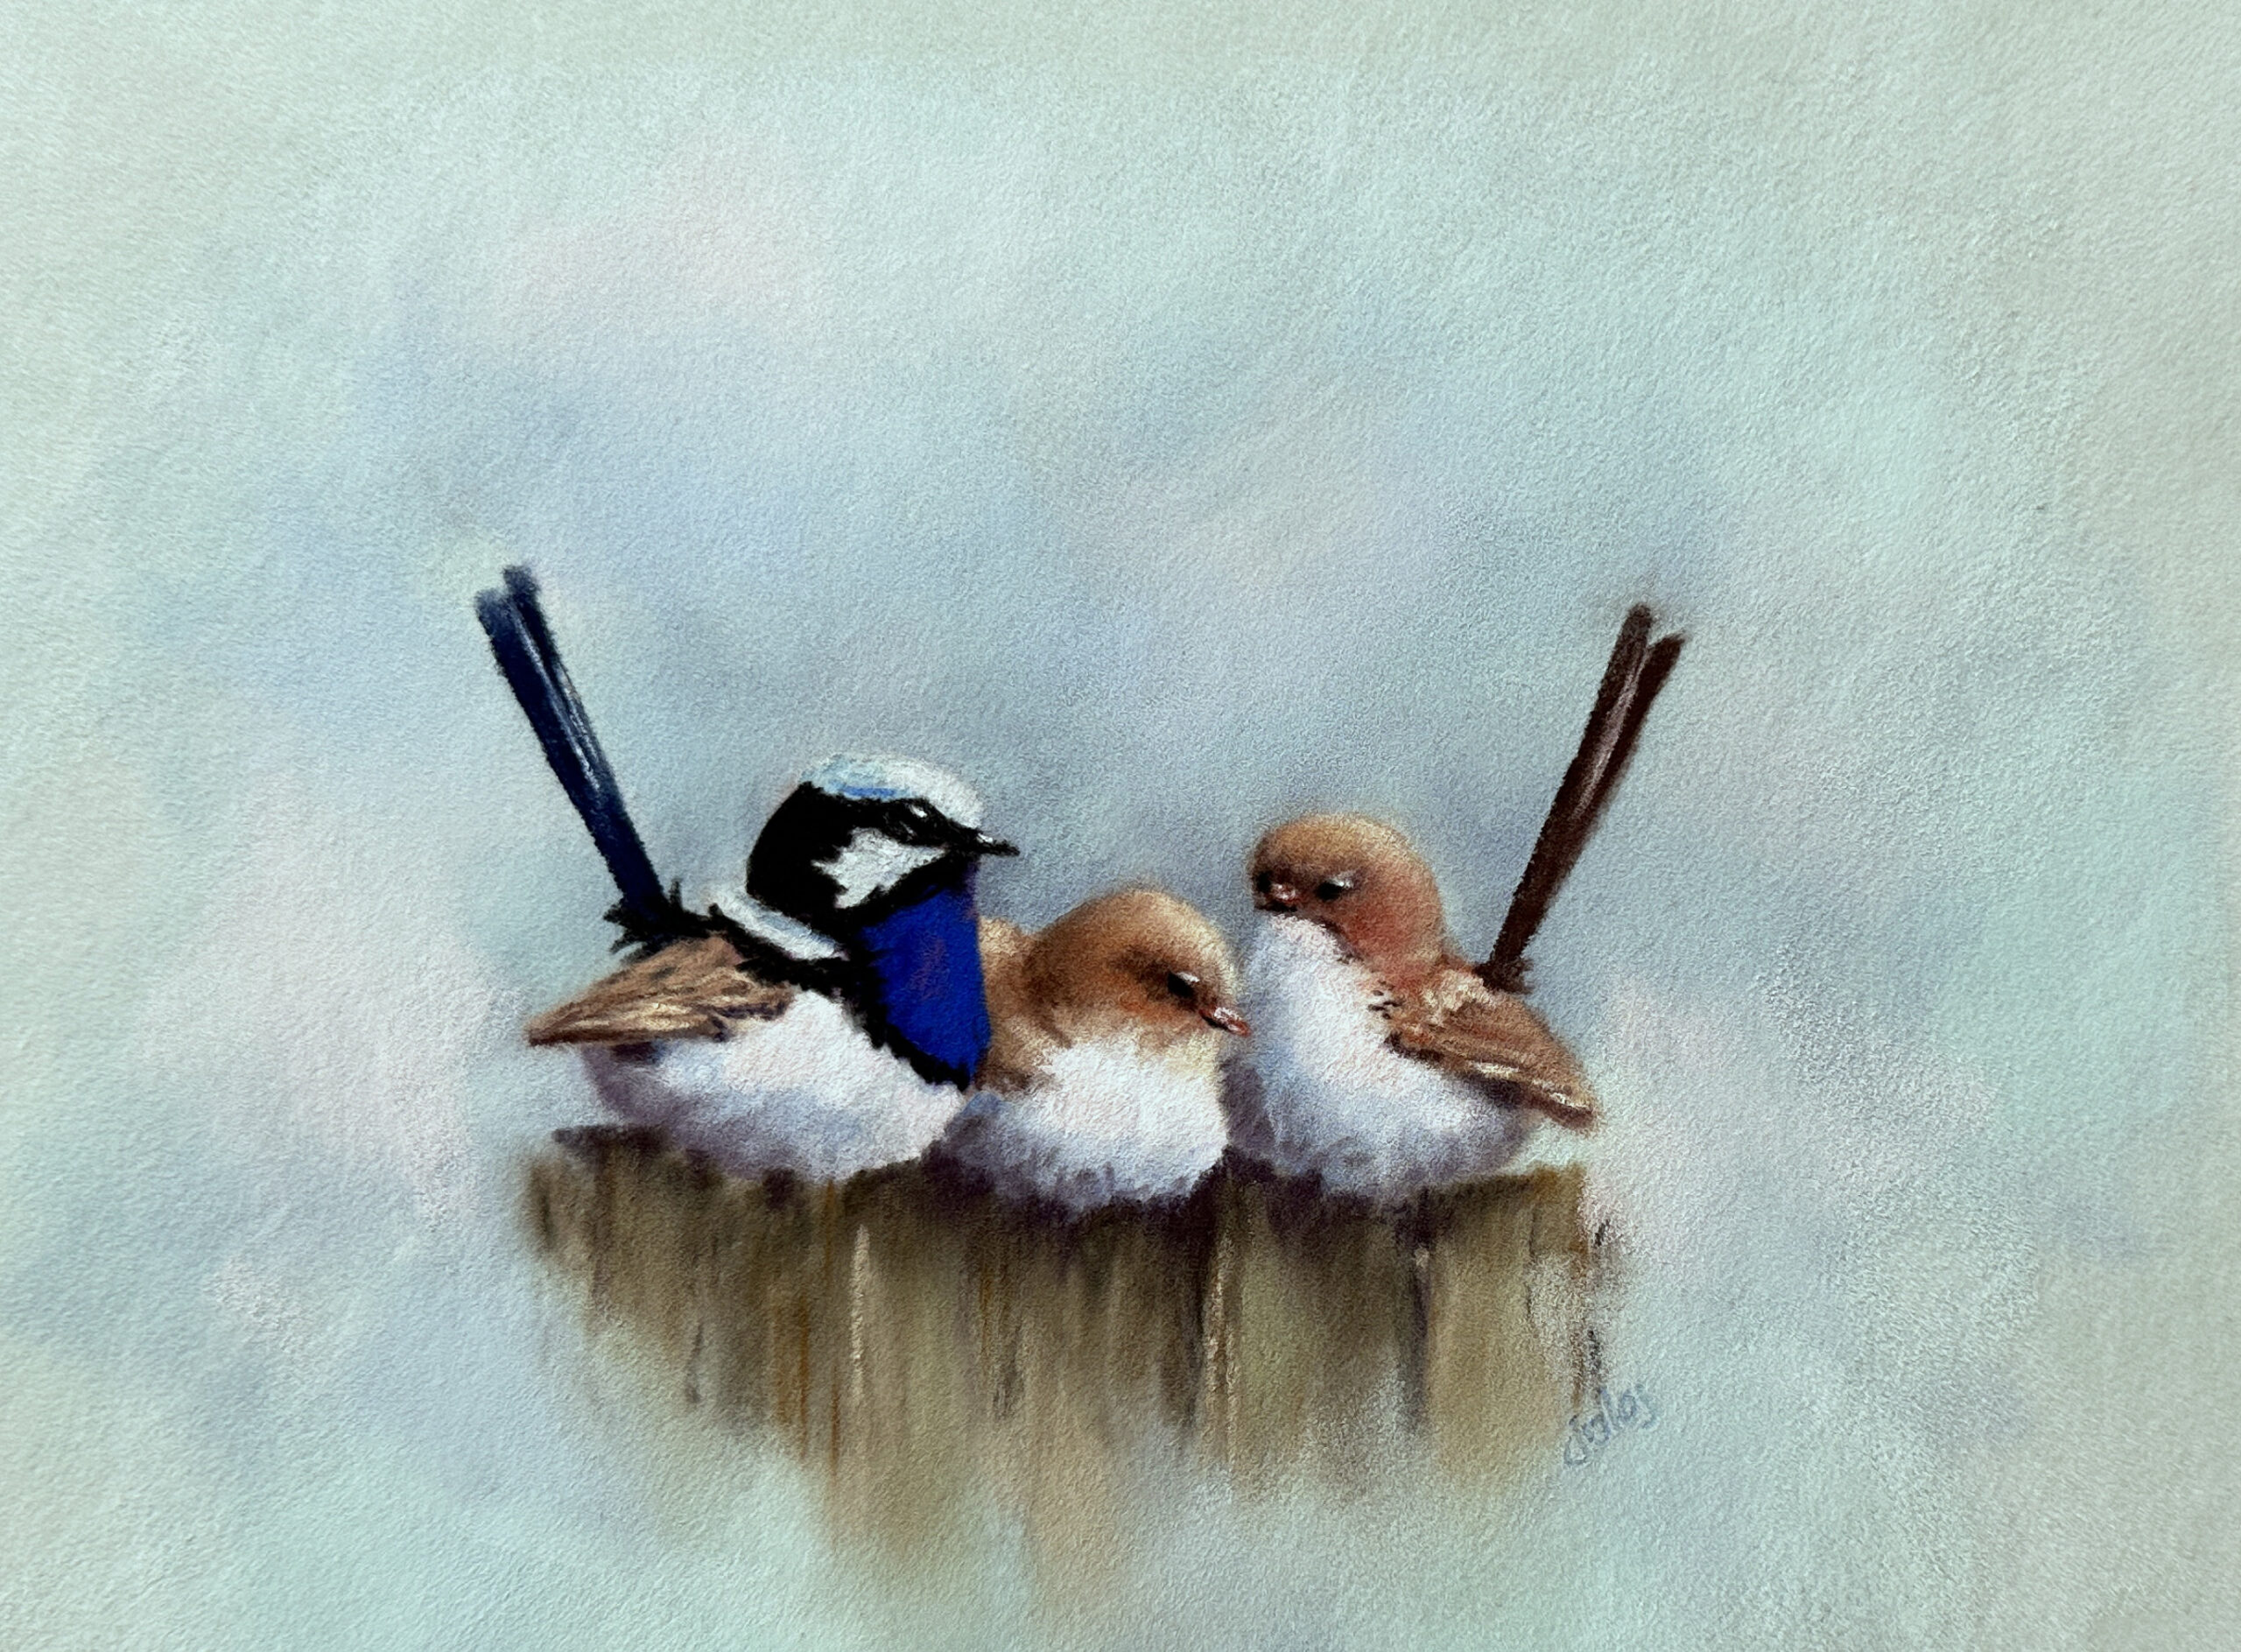 Image shows a painting of Superb Fairy Wrens at the Scottsdale Art Gallery Cafe for their Gallery Profile story with Art Trails Tasmania as part of their Artists Ensemble membership